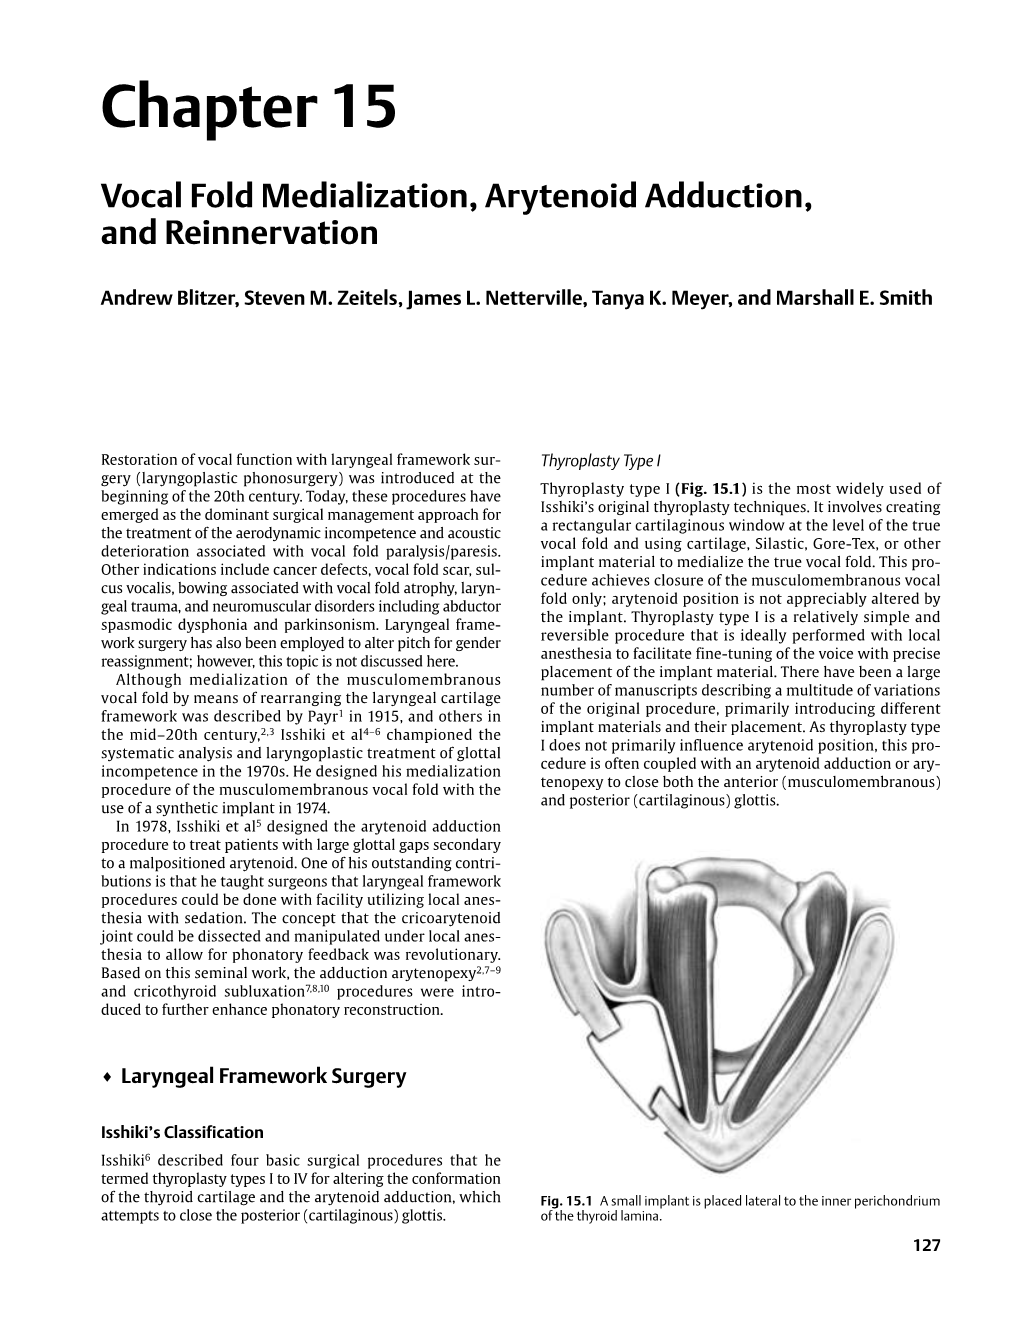 Chapter 15 Vocal Fold Medialization, Arytenoid Adduction, And